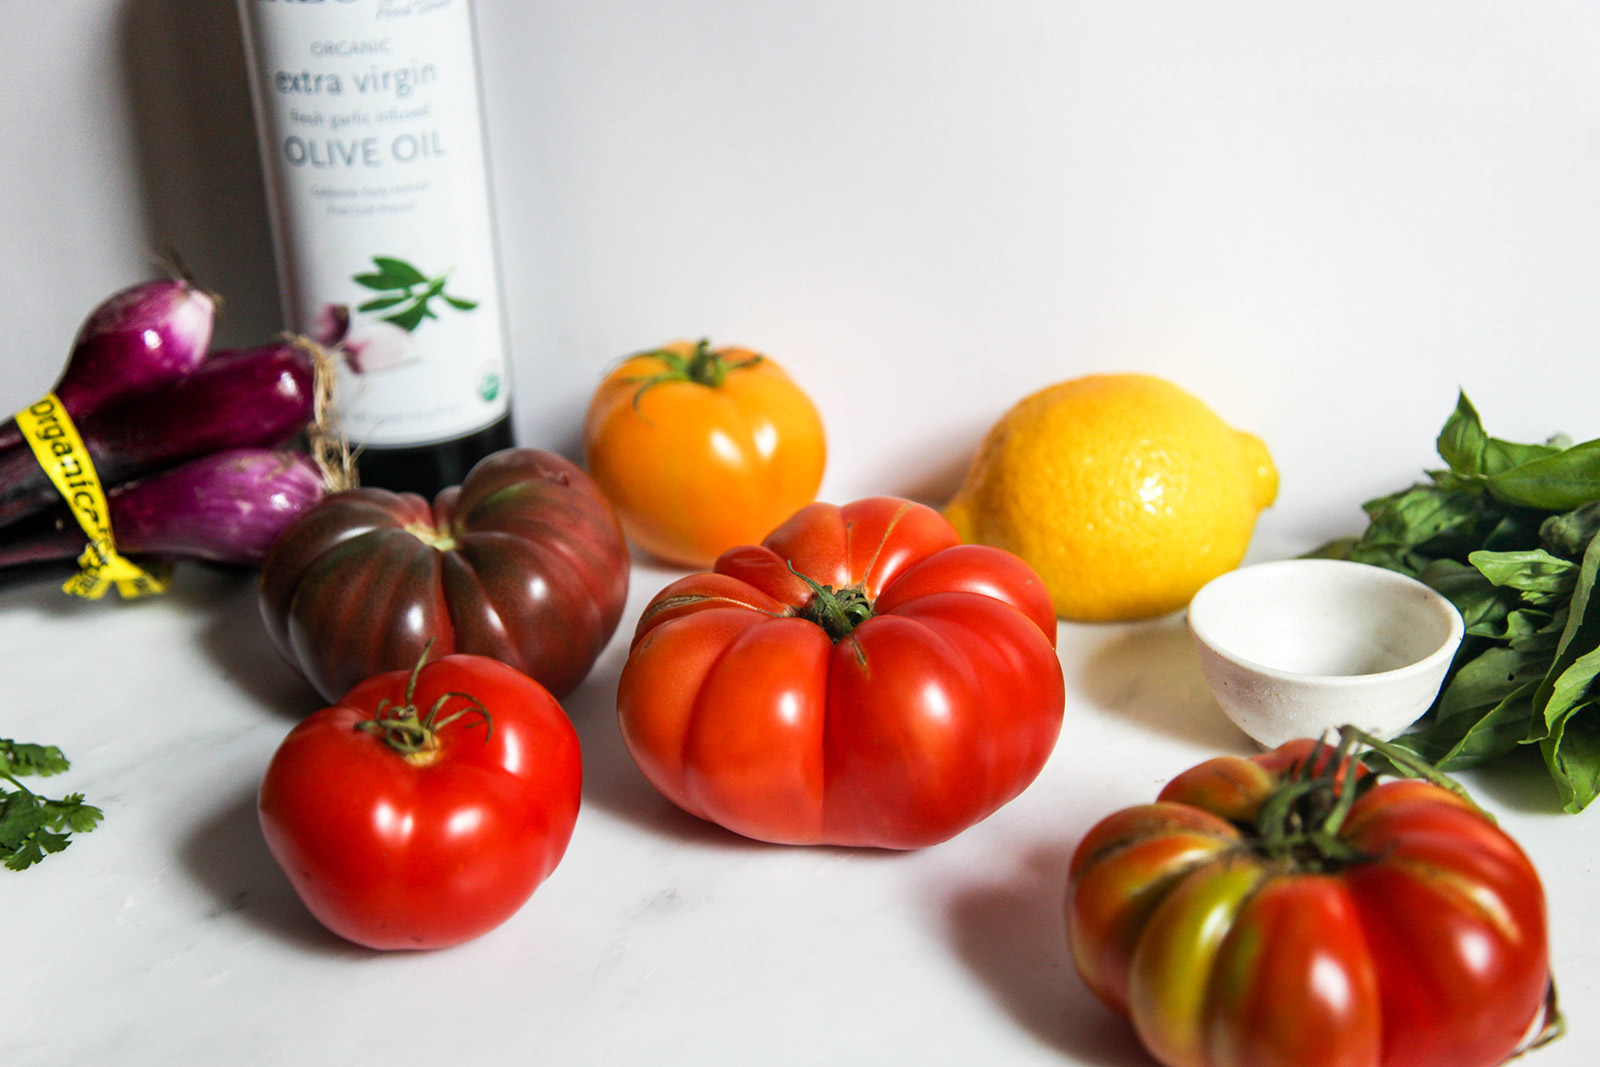 Ingredients for Portuguese-inspired Heirloom Tomato Salad